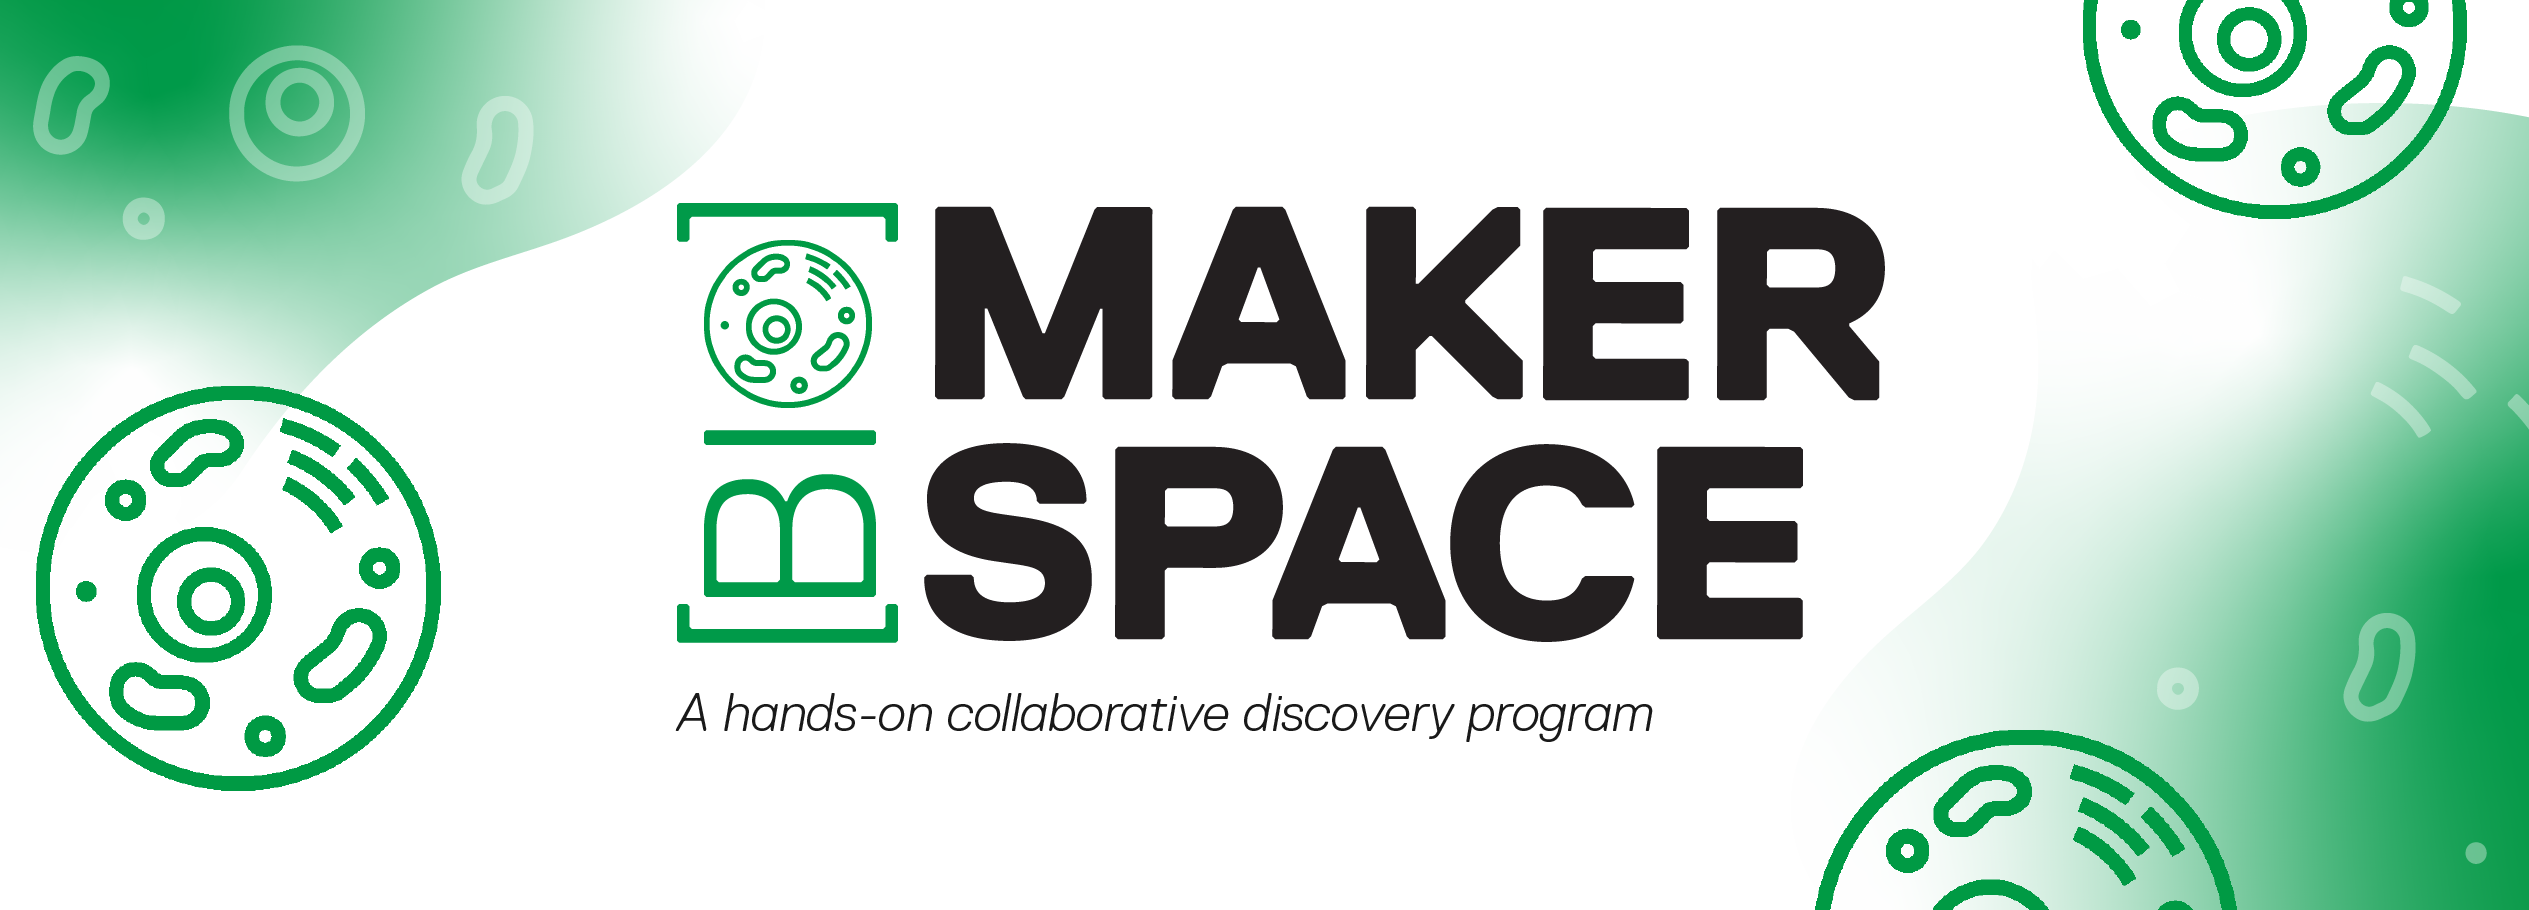 promotional banner for the SDZ's biomakerspace program